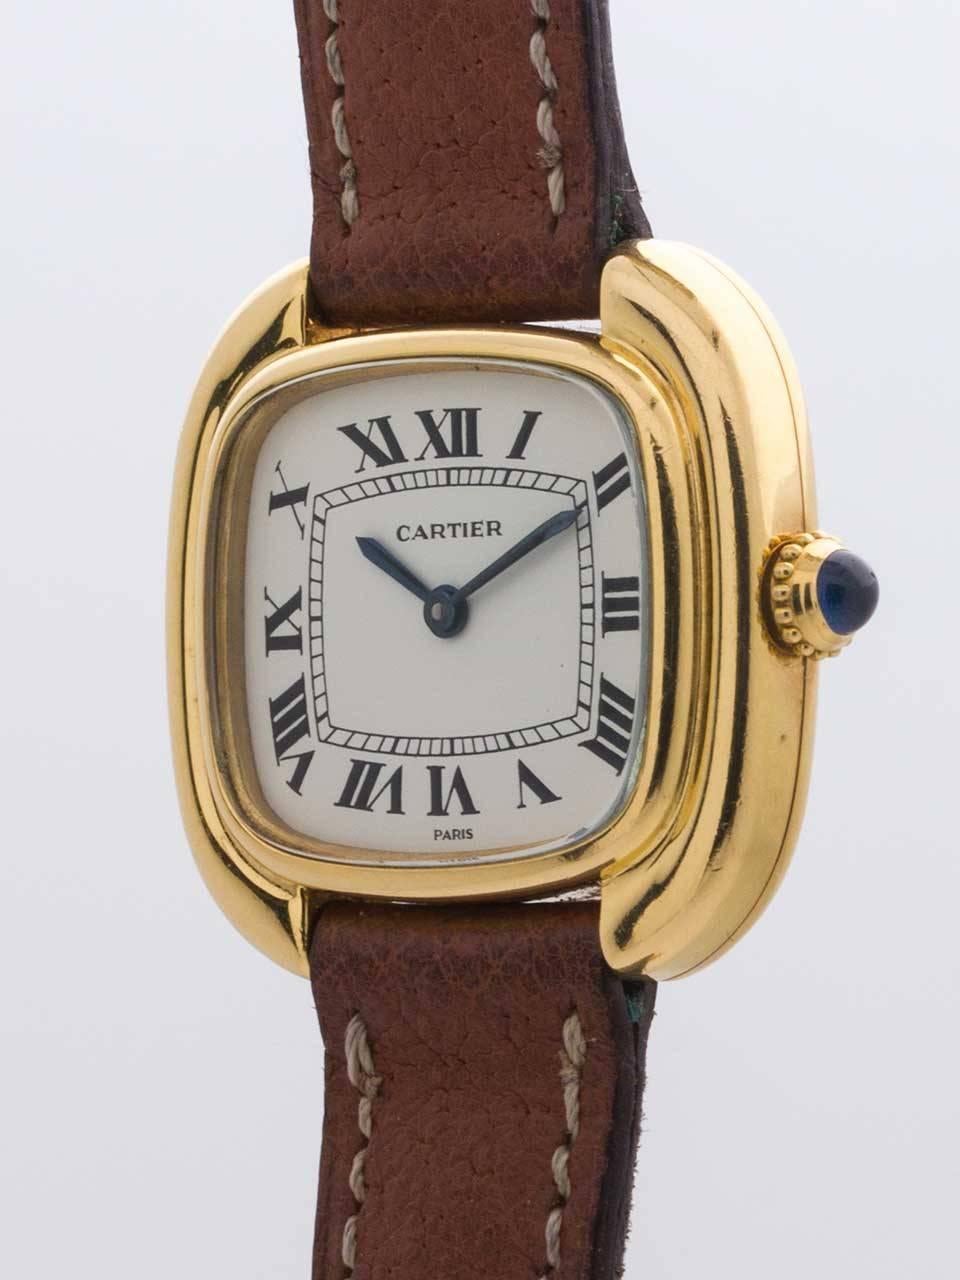 Cartier Lady’s Gondole 18K Yellow Gold circa 1990s. 27 x 25mm stepped case with blue sapphire cabachon crown. White dial with printed black Arabic numerals and blue steeled hands. Powered by battery quartz movement. On short brown leather singed